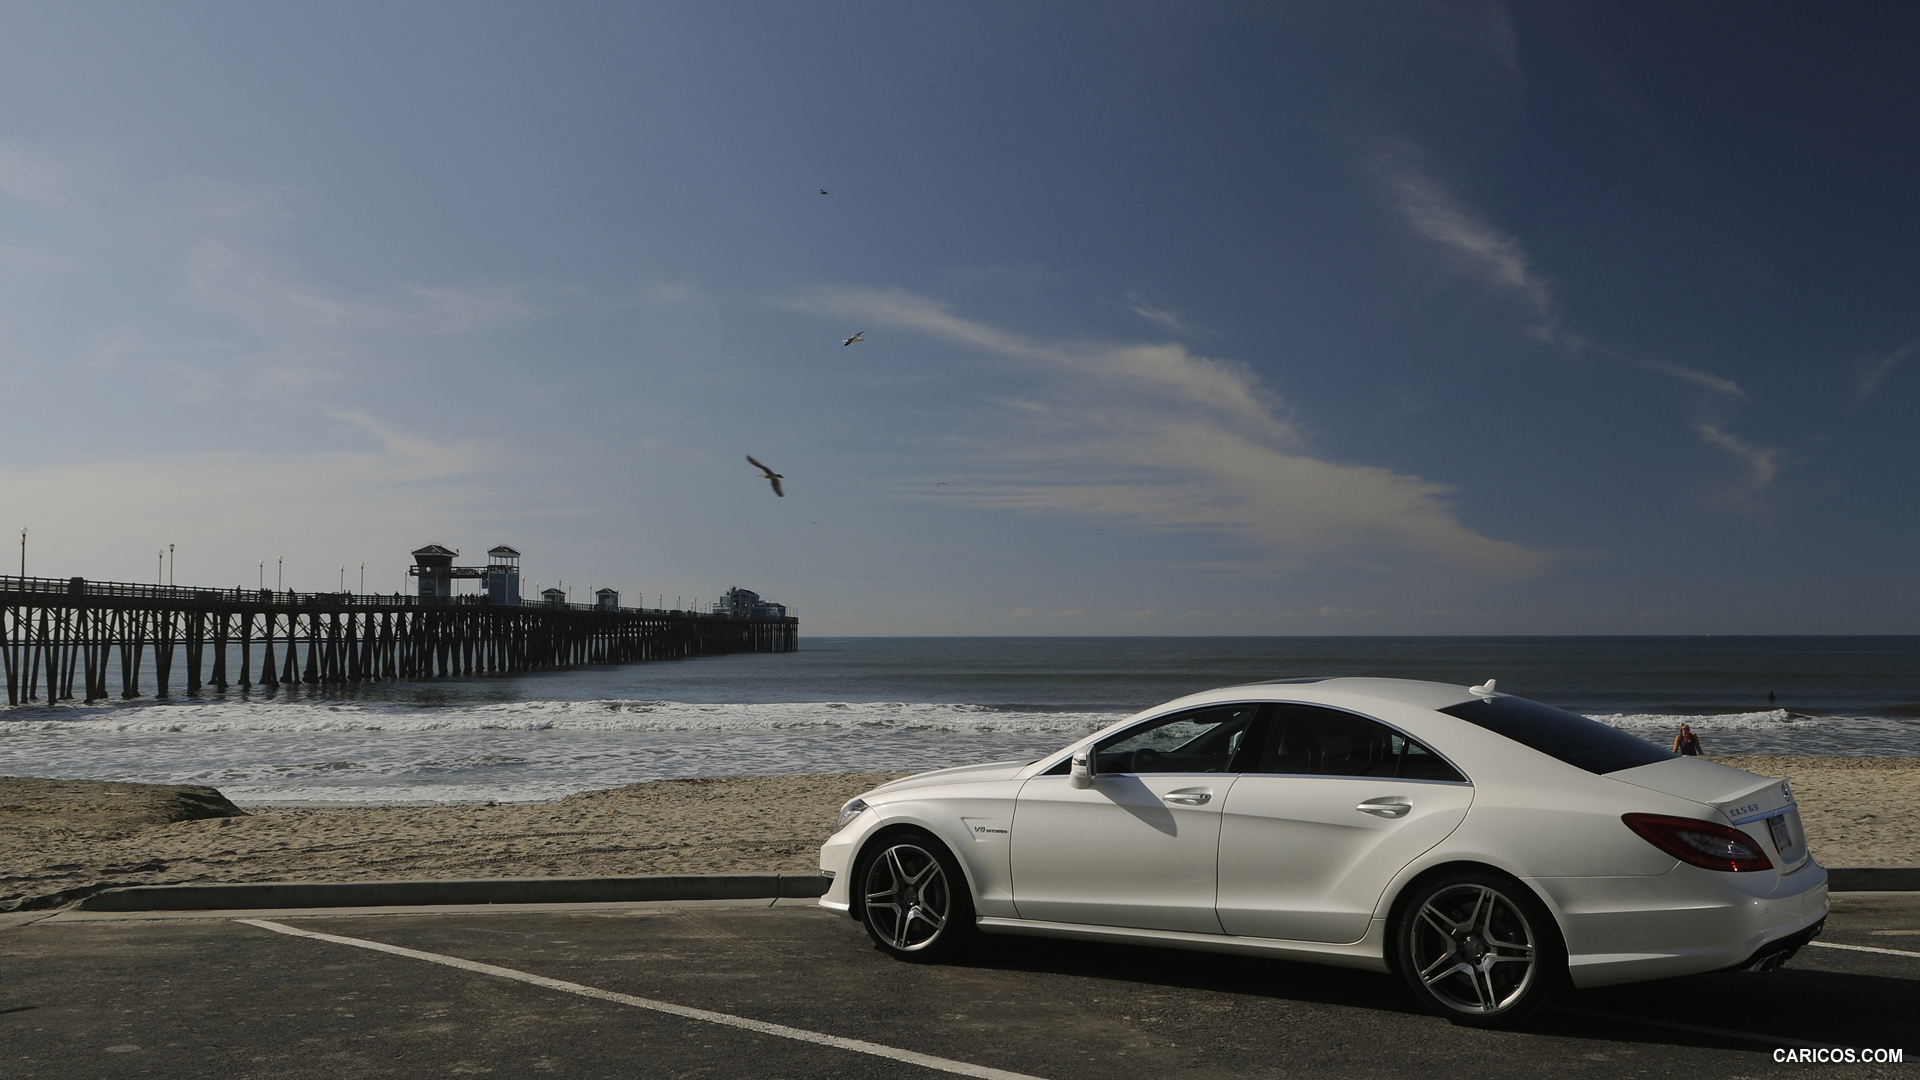 Mercedes-Benz CLS63 AMG (2012) US-Version - Diamond White - Side, #14 of 100